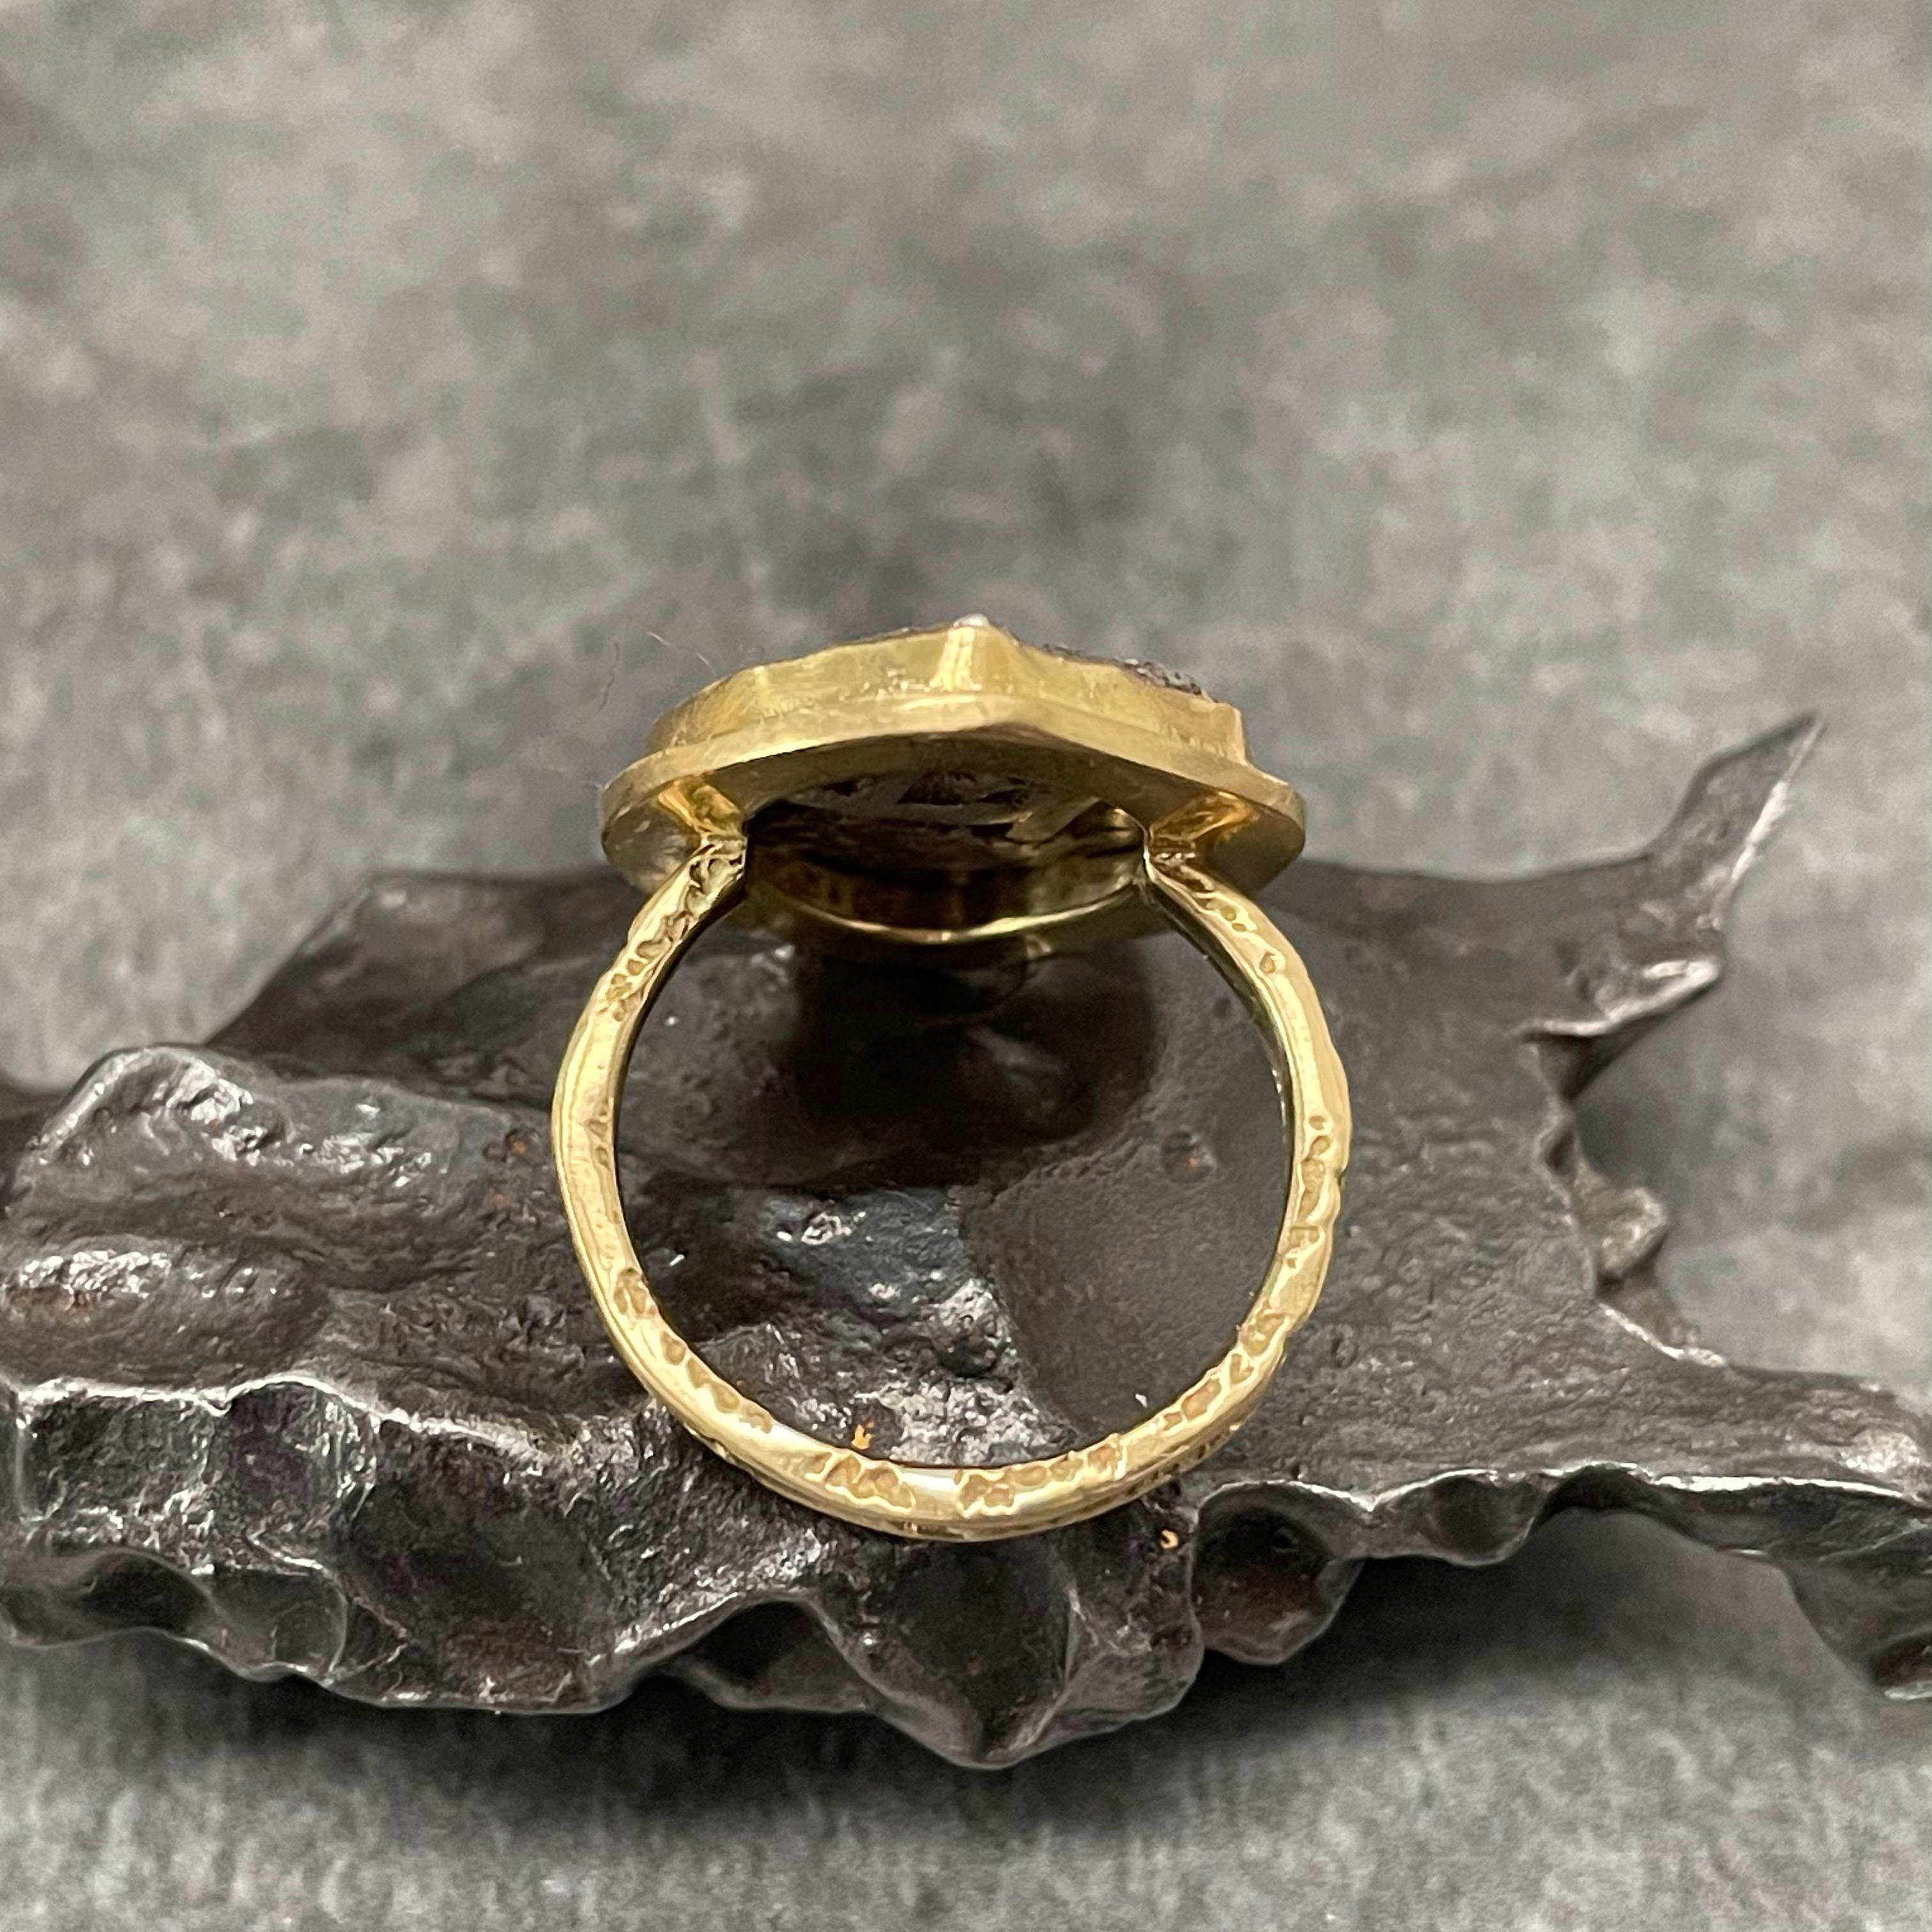 pirate coin ring